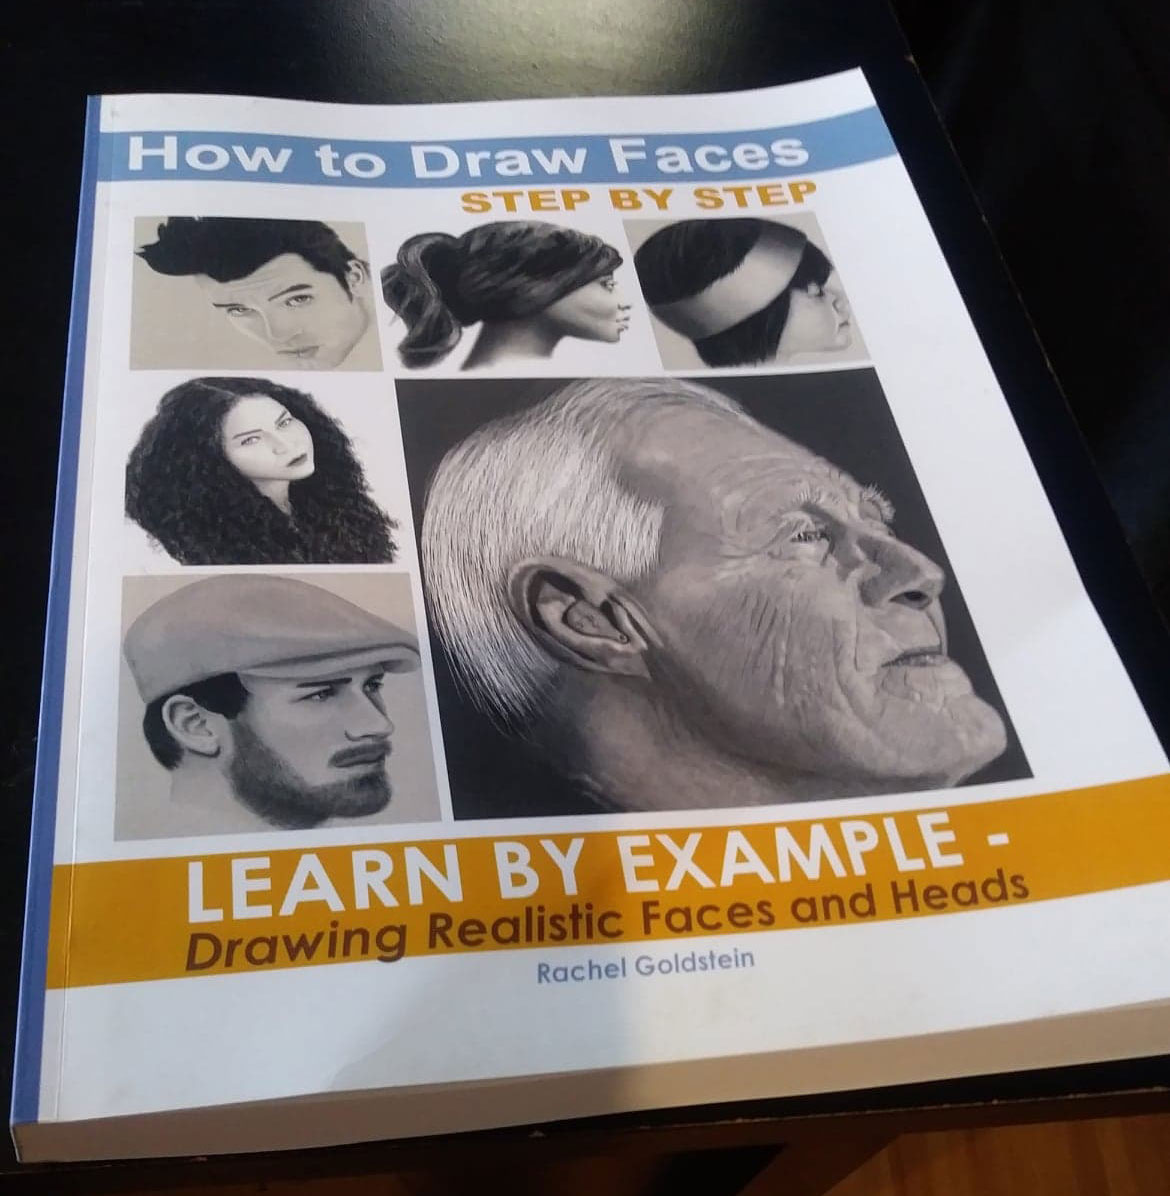 drawing faces - how to draw faces step by step book